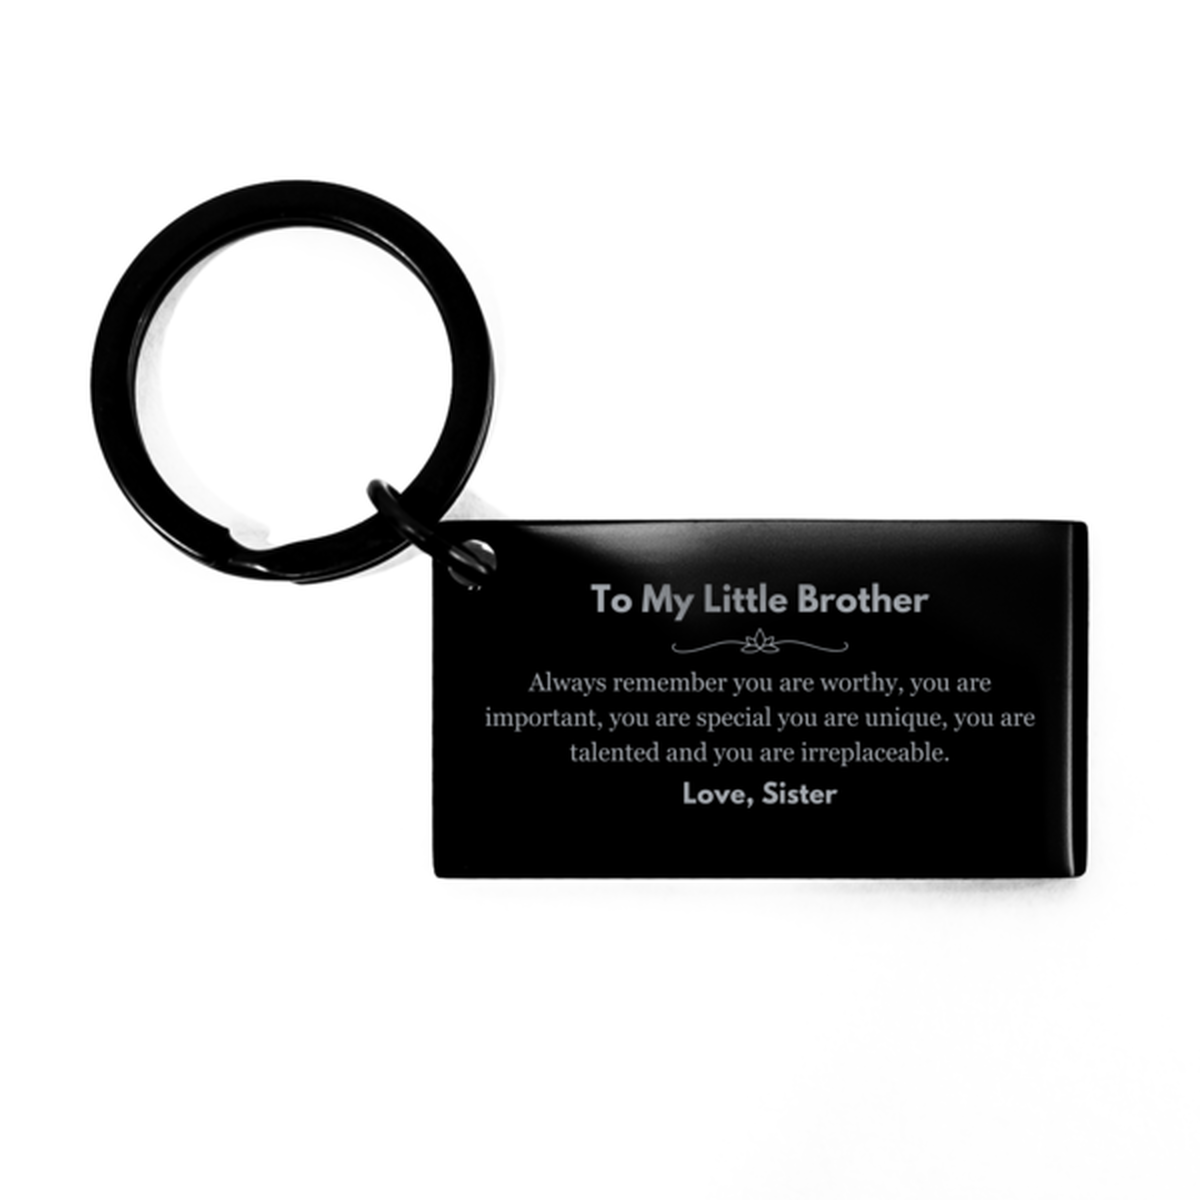 Little Brother Birthday Gifts from Sister, Inspirational Keychain for Little Brother Christmas Graduation Gifts for Little Brother Always remember you are worthy, you are important. Love, Sister